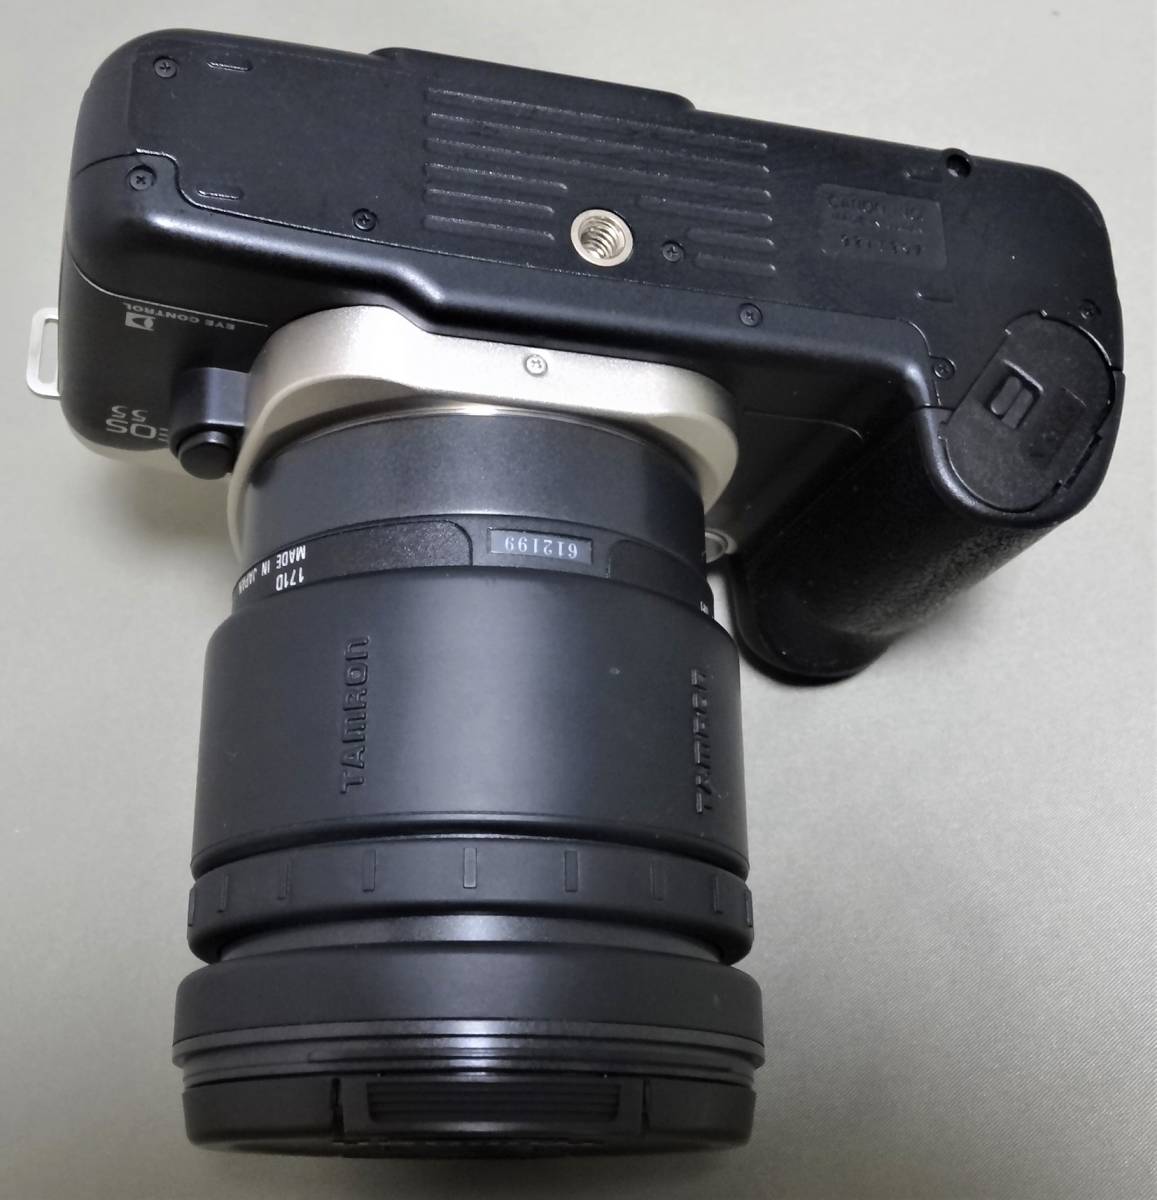 Canon EOS 55 + TAMRON AF28-200mm Super F/3.8-5.6 + Battery Pack BP-50 +  Remote Switch RS-60E3(キヤノン)｜売買されたオークション情報、yahooの商品情報をアーカイブ公開 -  オークファン（aucfan.com）